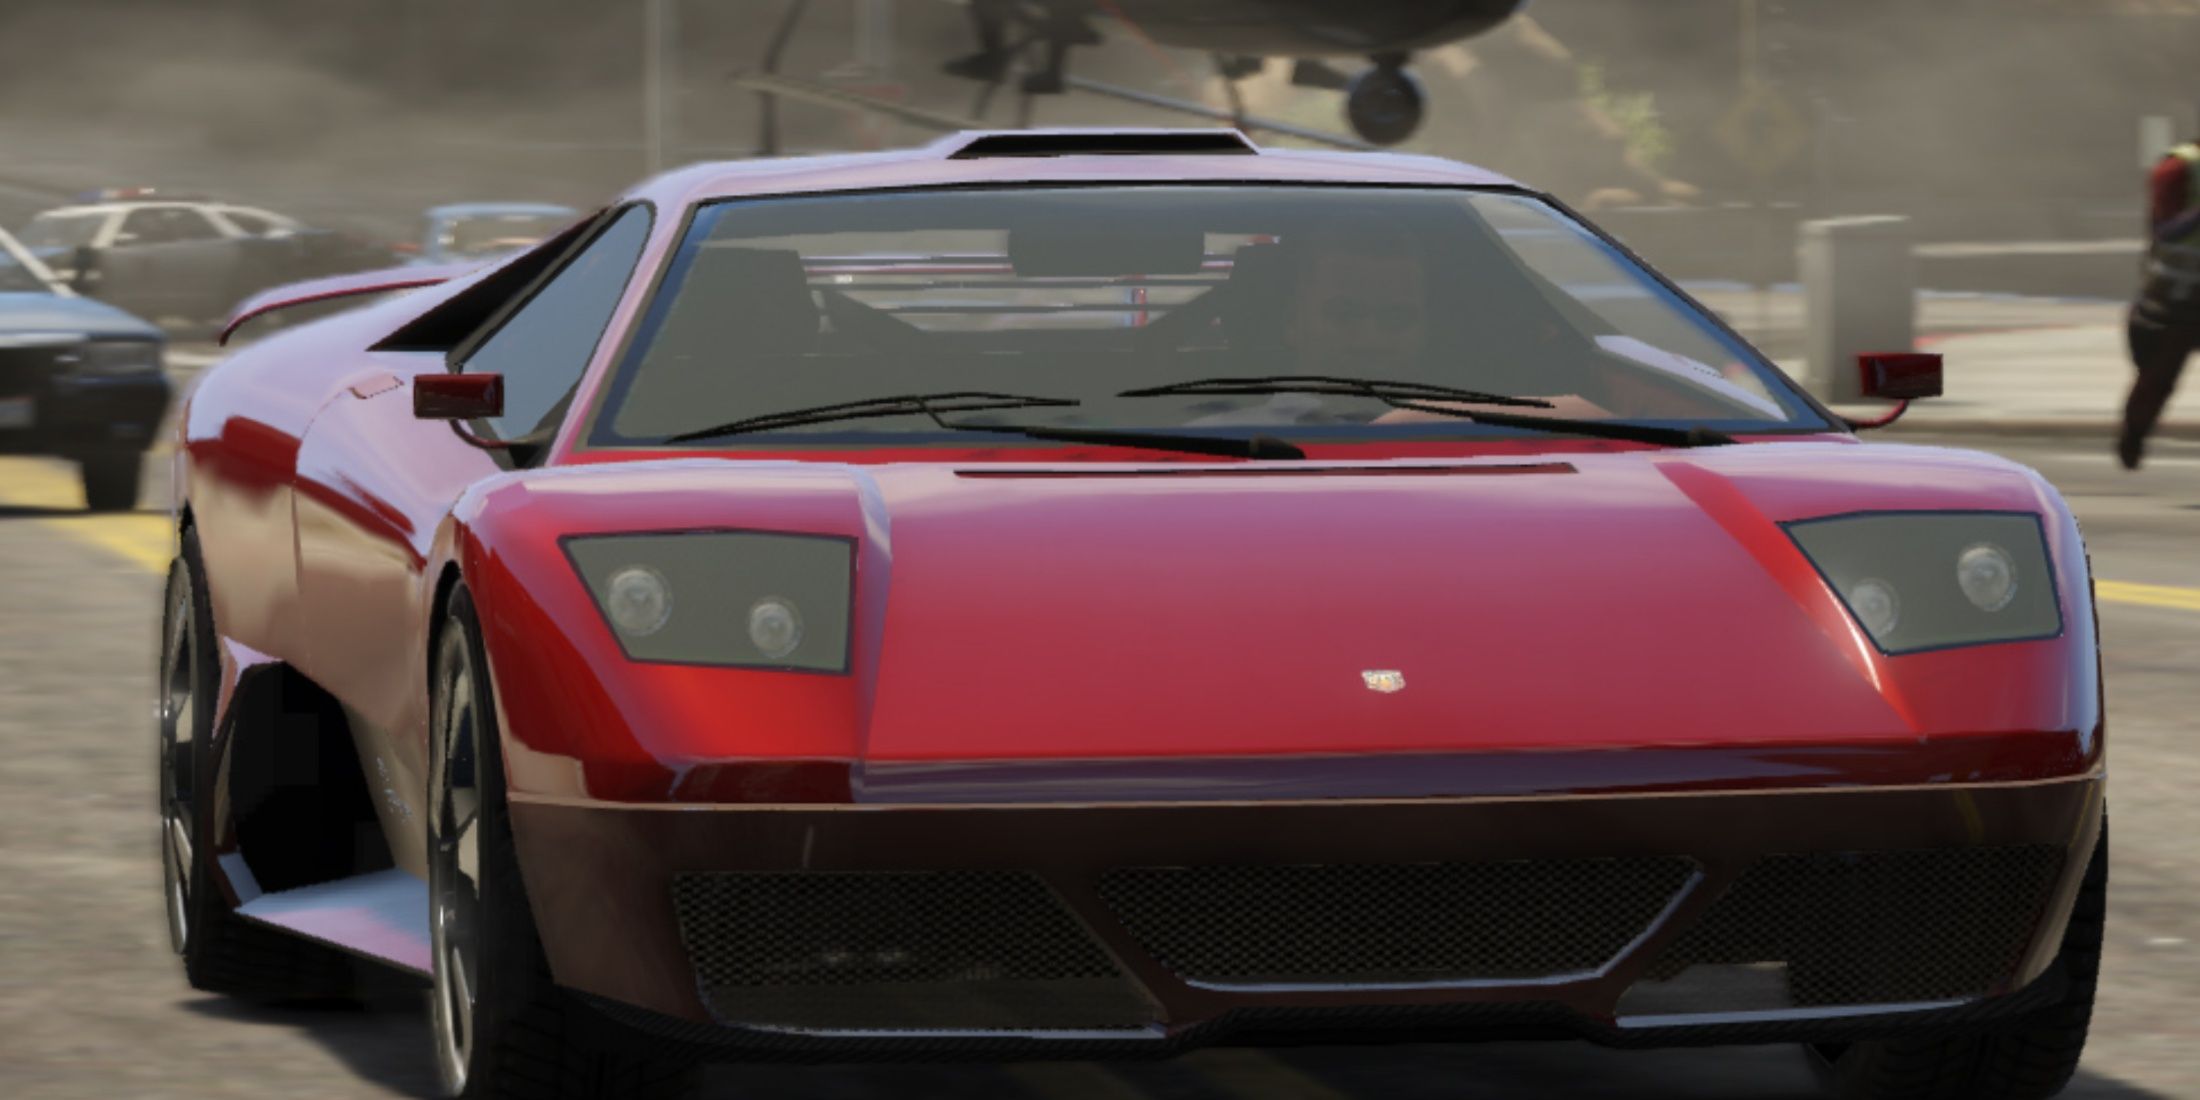 Grand Theft Auto 5 Is A Game That Gets Better With Age